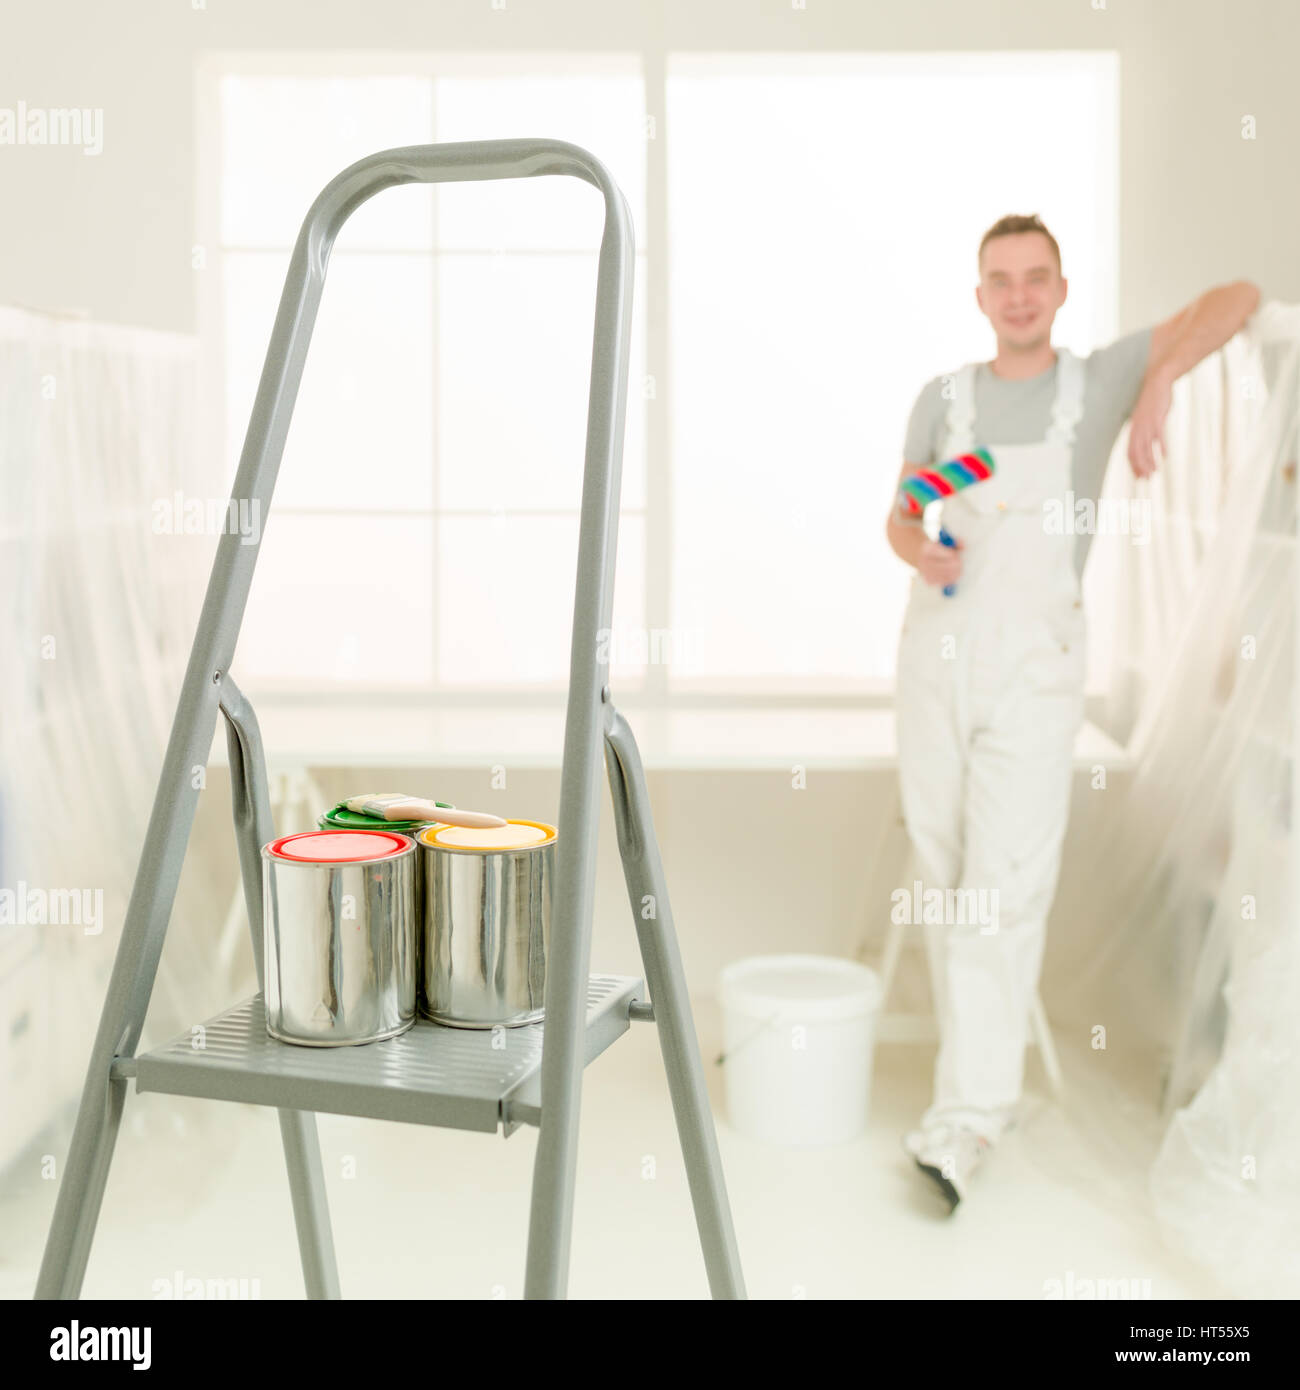 Square image colourful cans of paint on a stepladder young decorator in background blurred diy Stock Photo